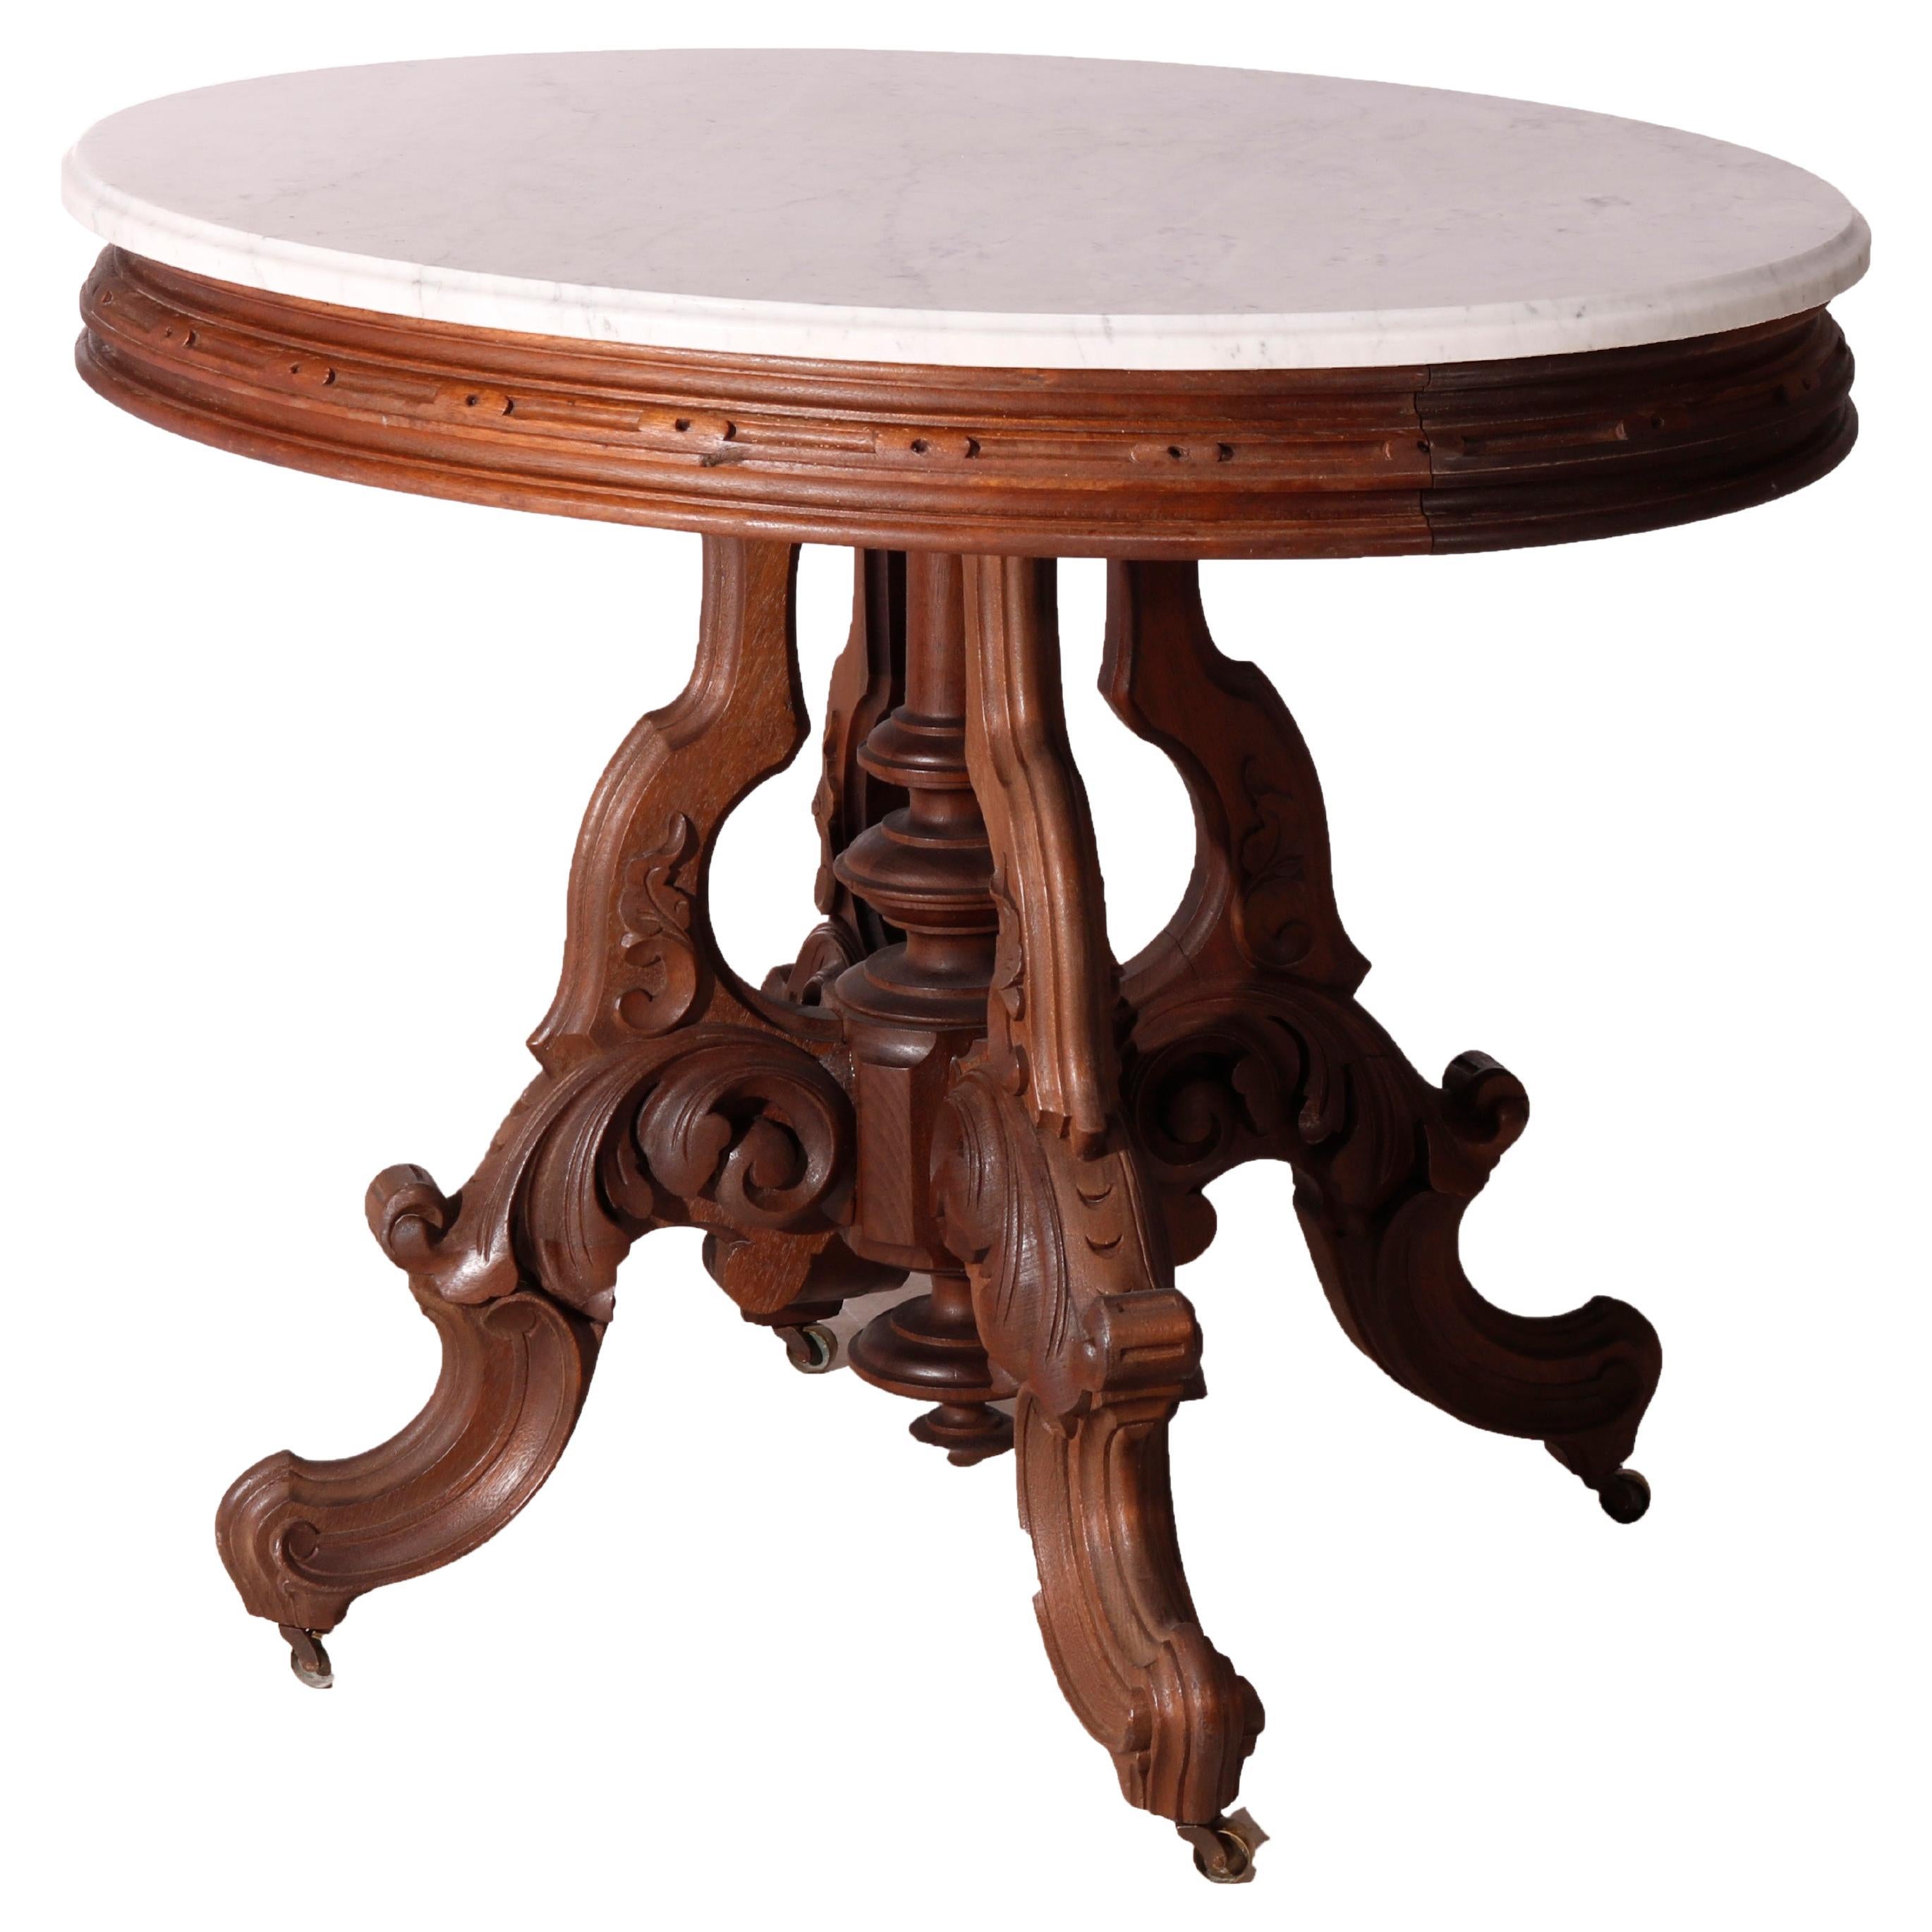 Oversized Antique Victorian Walnut Brooks Oval Marble Top Parlor Table 1890 For Sale